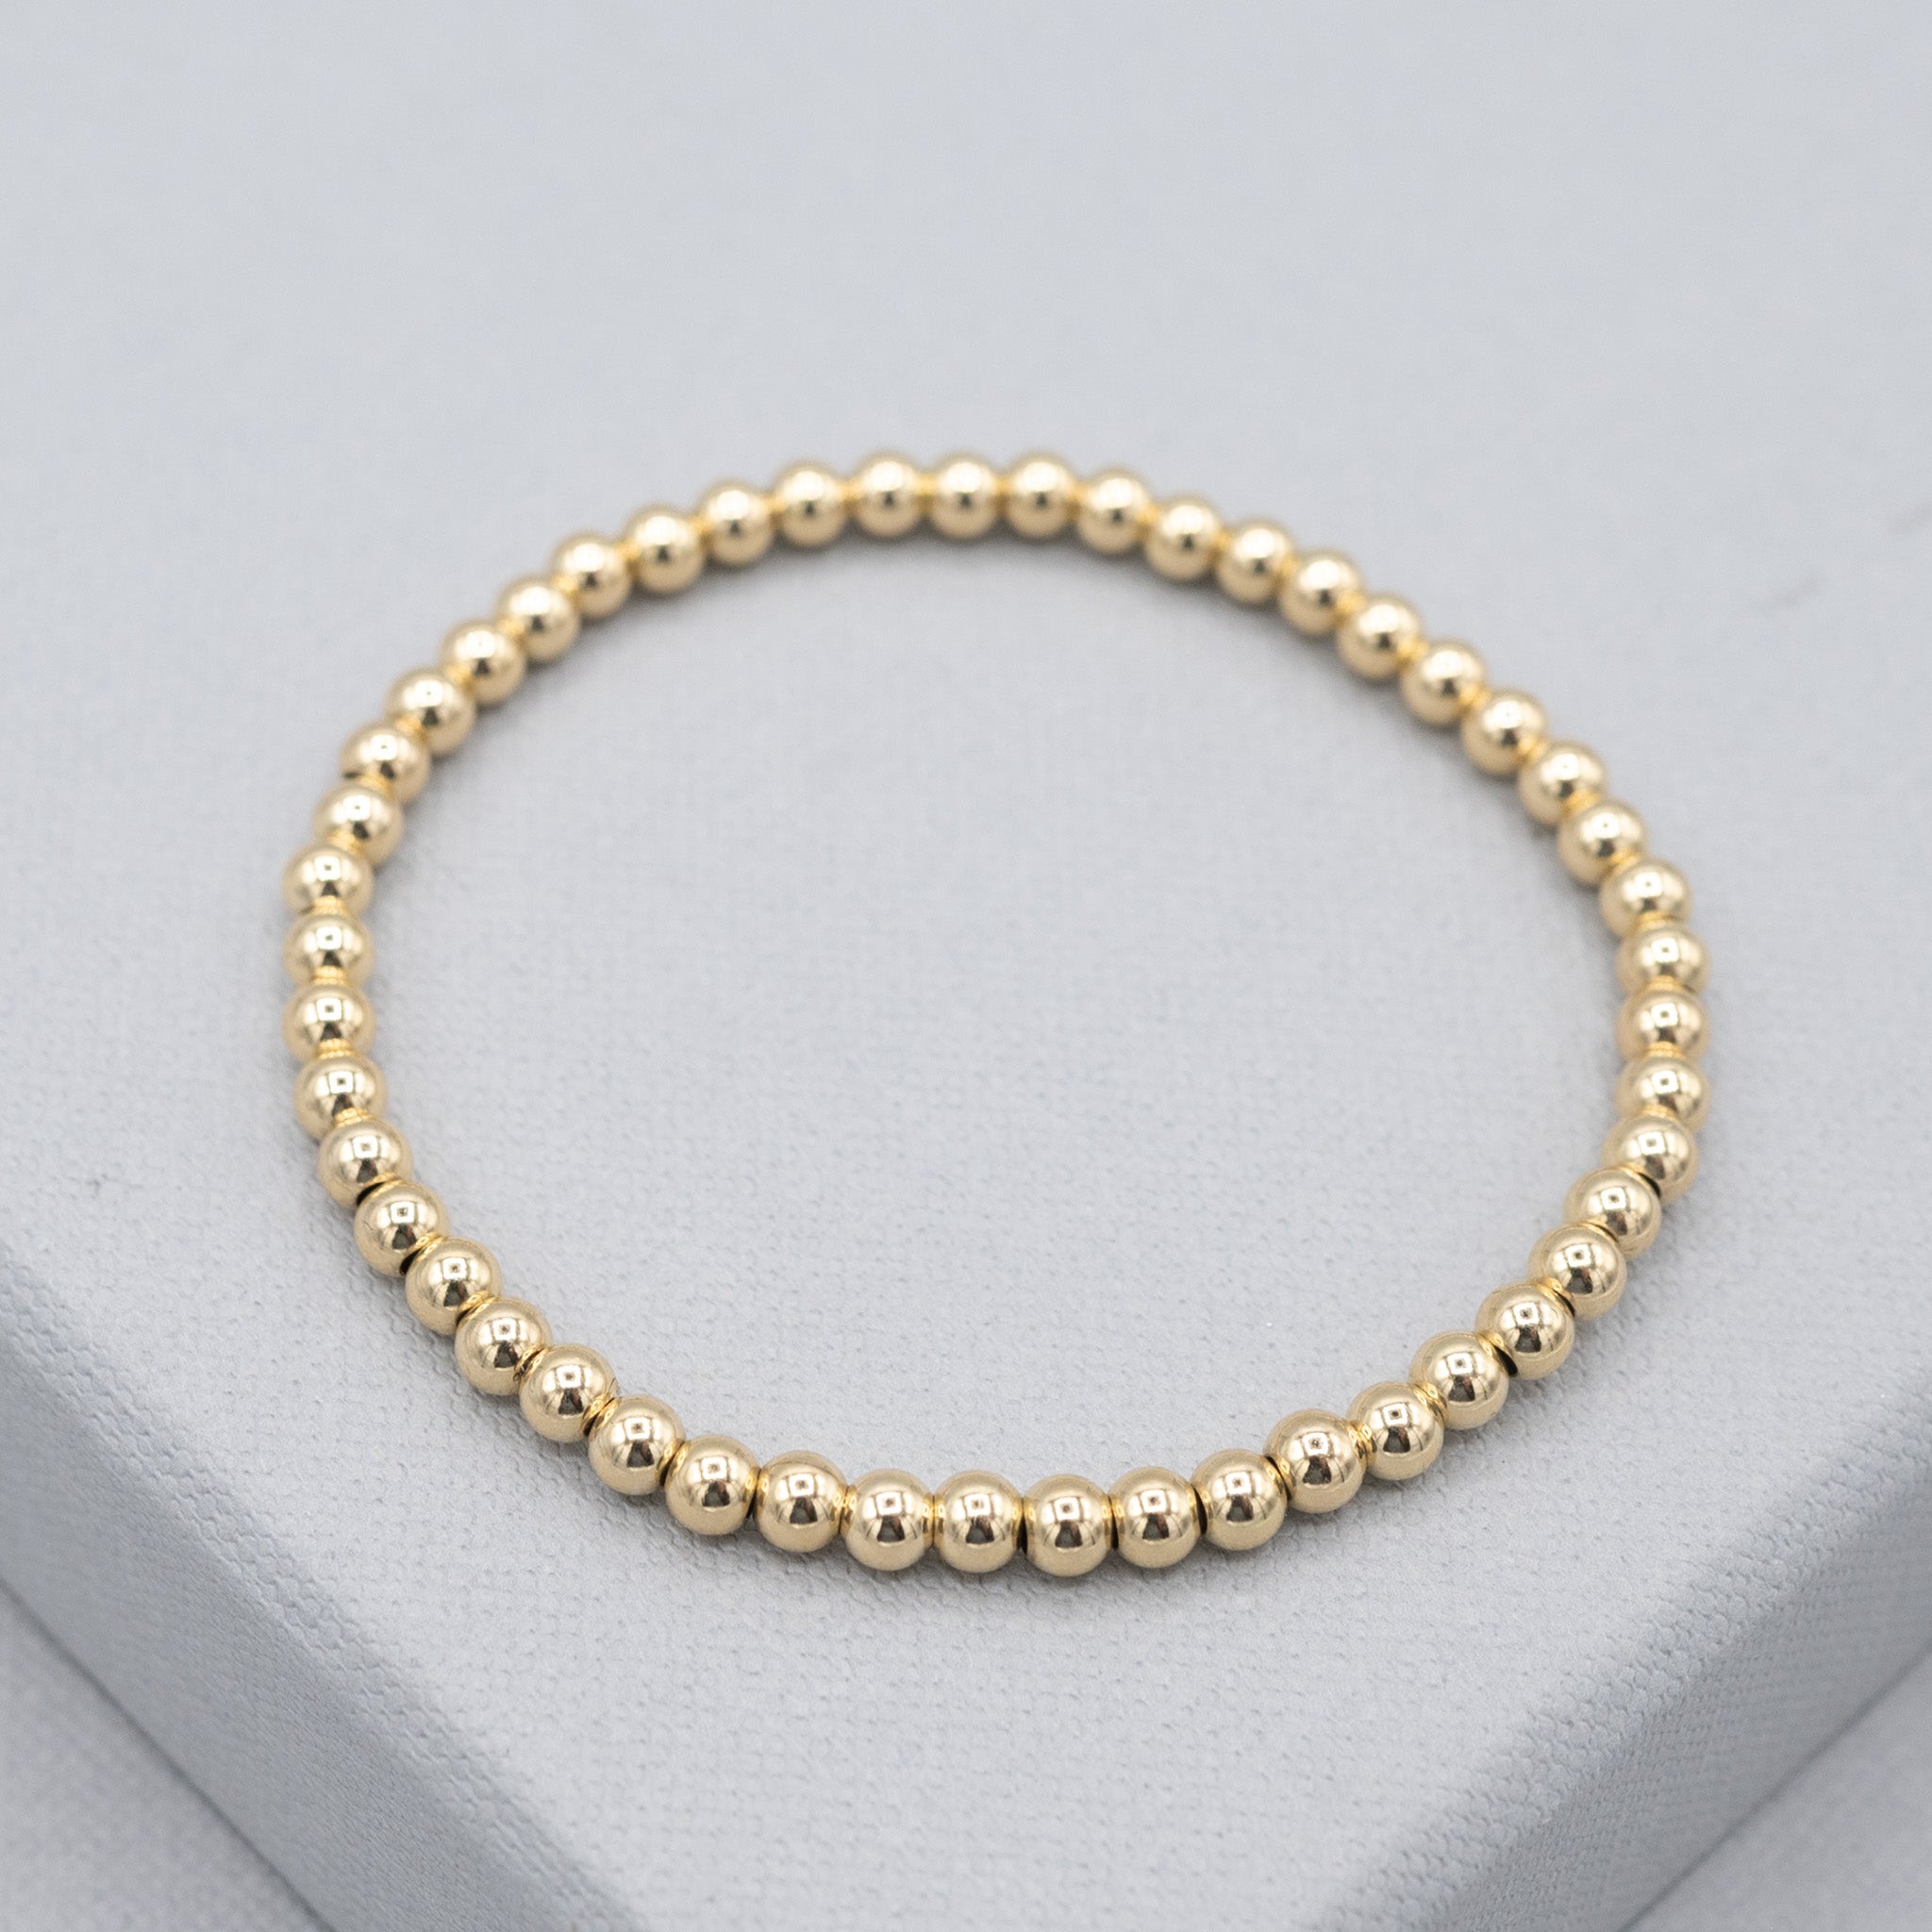 4mm 14kt Gold Filled Bead Bracelet with Small Round Sapphire